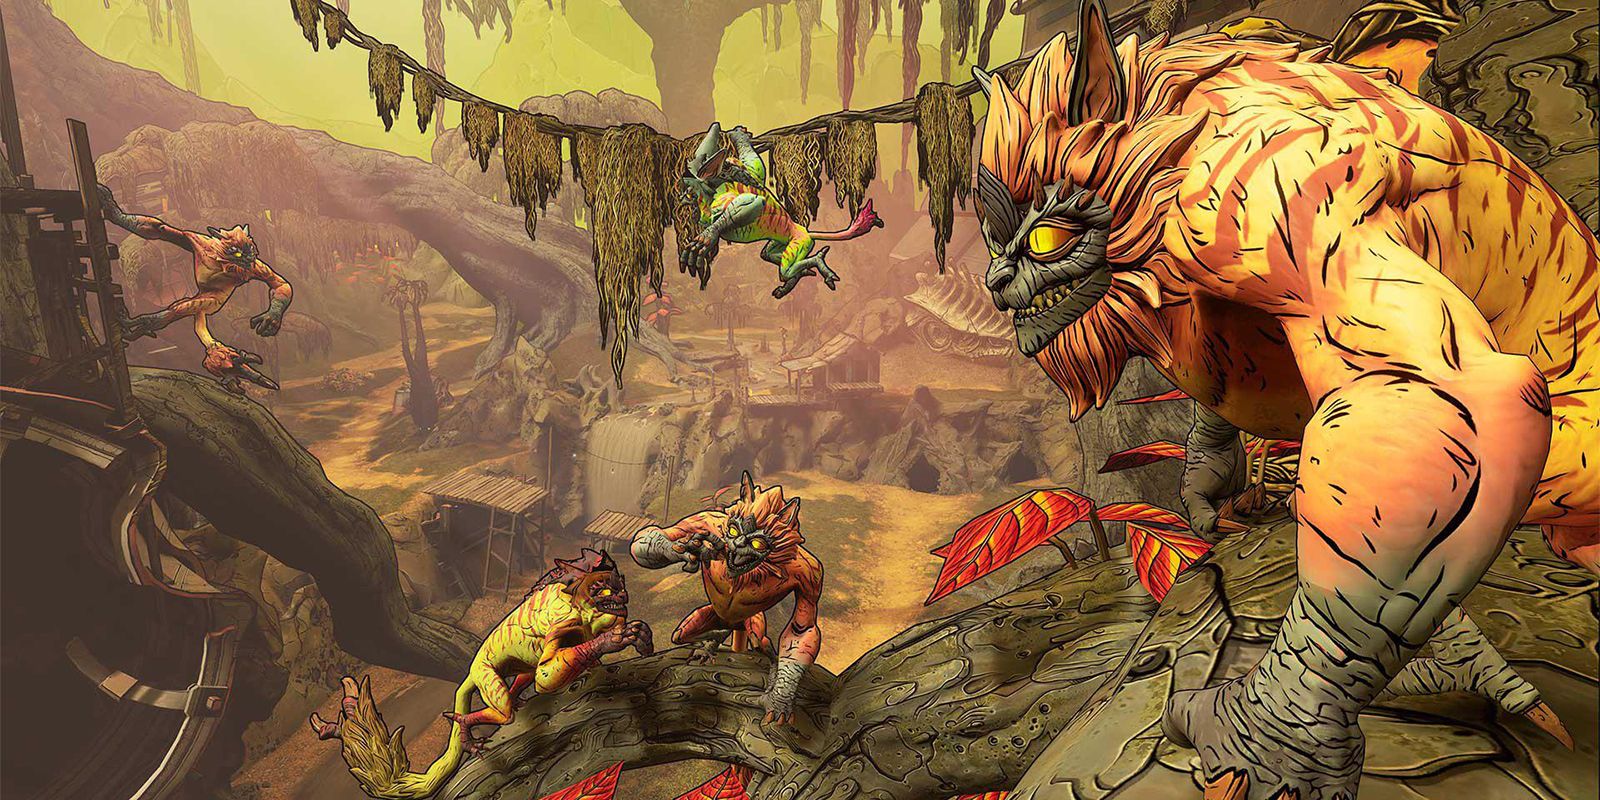 An area with multiple jabbers that communicate with each other and swing from environmental objects in Borderlands 3.